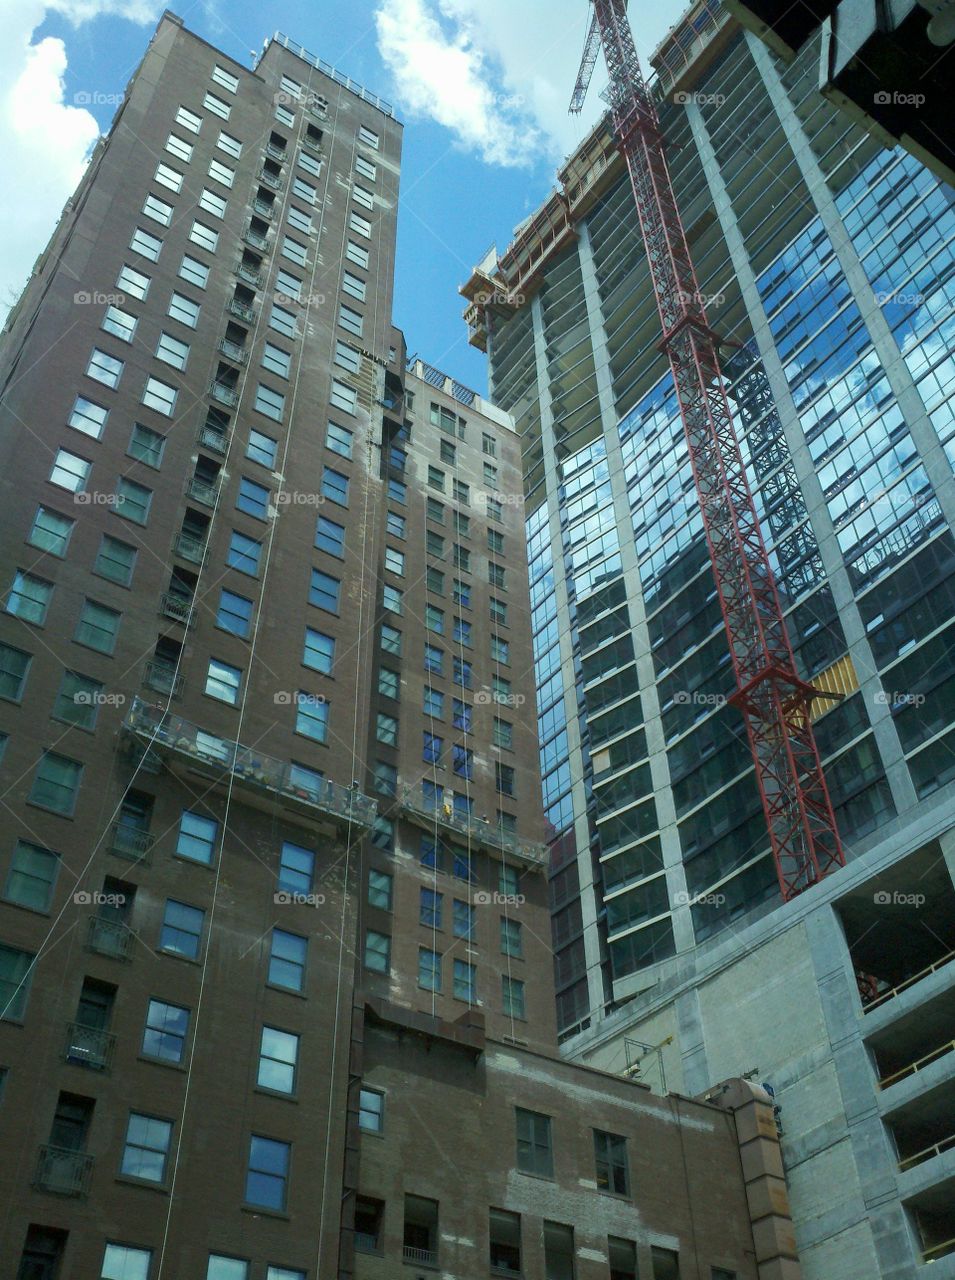 Construction on some skyscrapers in Chicago.